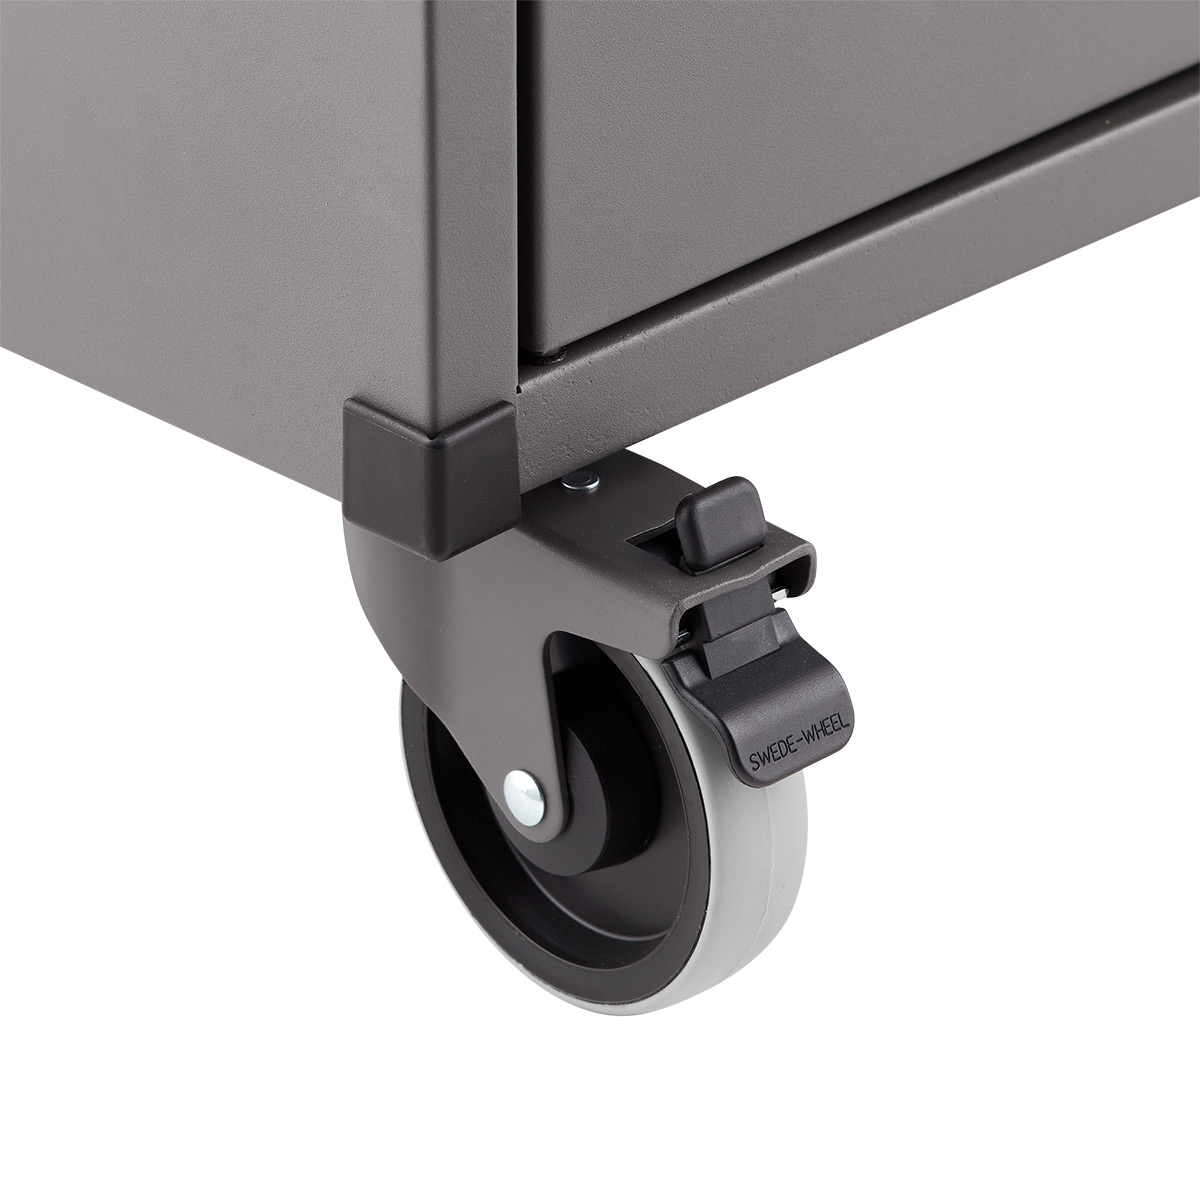 https://www.containerstore.com/catalogimages/514181/10093466-garage-lower-cabinet-caster.jpg